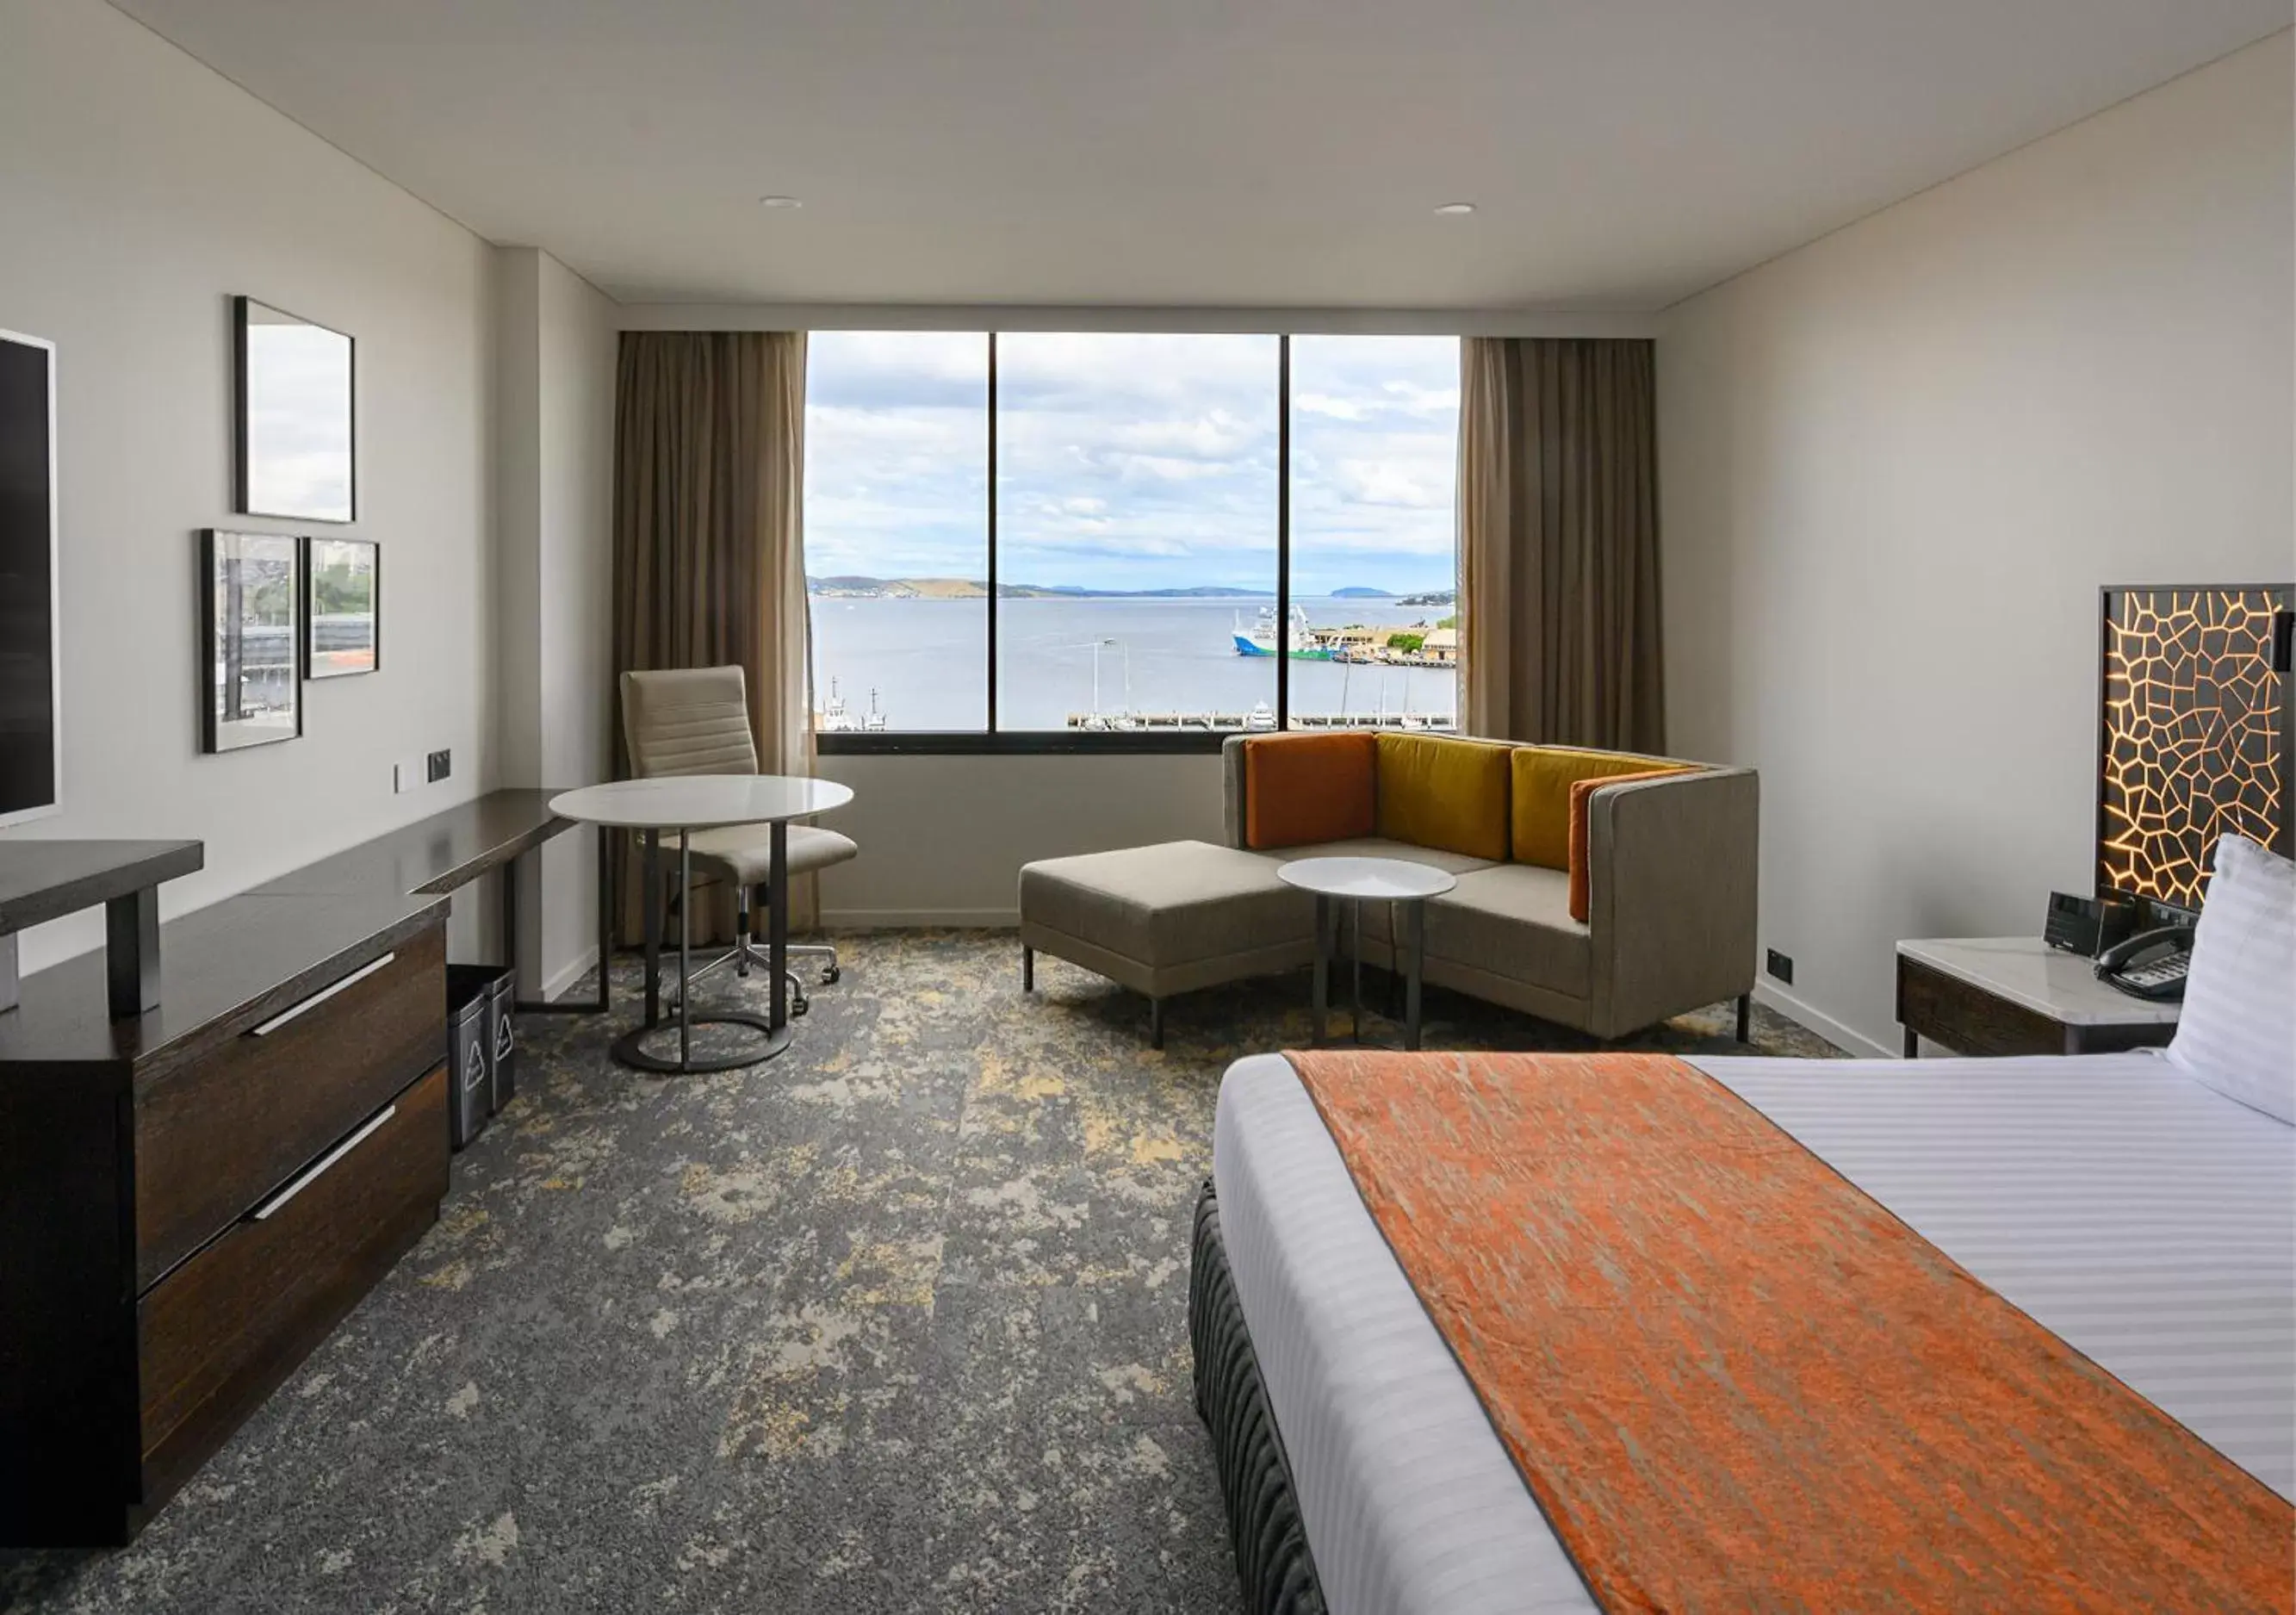 Sea view in Hotel Grand Chancellor Hobart